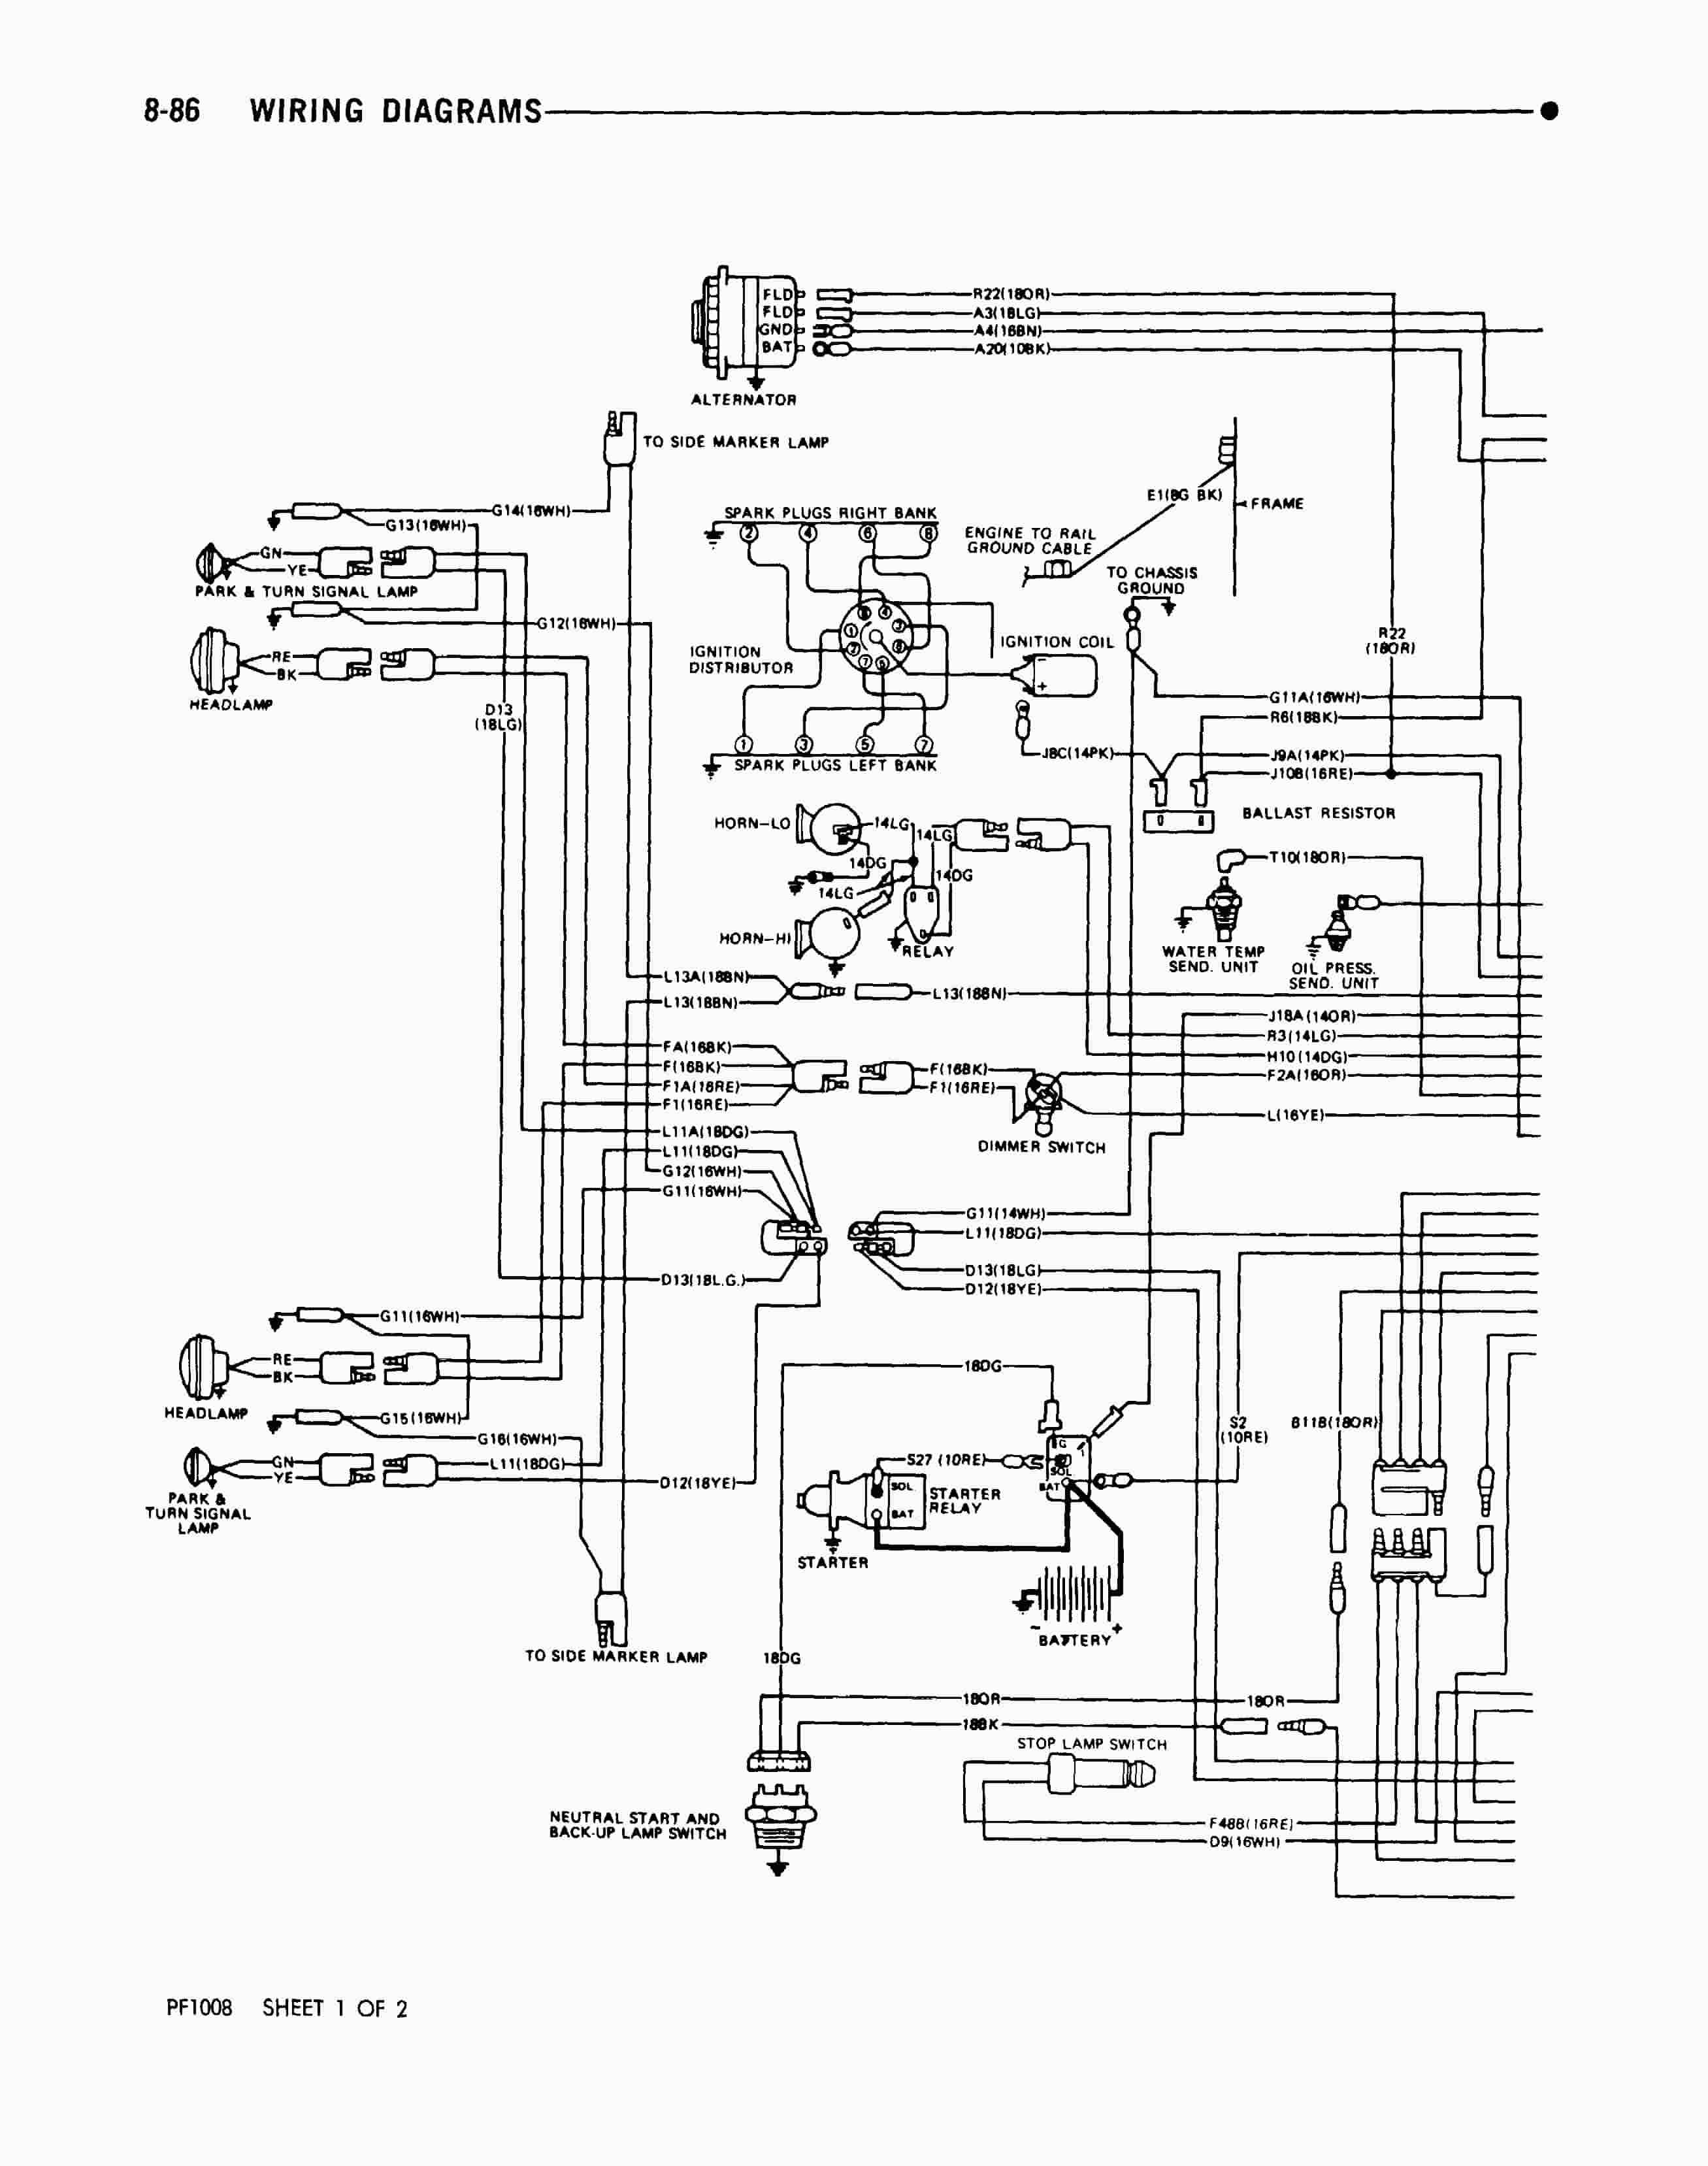 Dave's Place - 70-71 Dodge Class A Chassis Wiring Diagram Dodge Pickup Wiring Diagram Daves Place